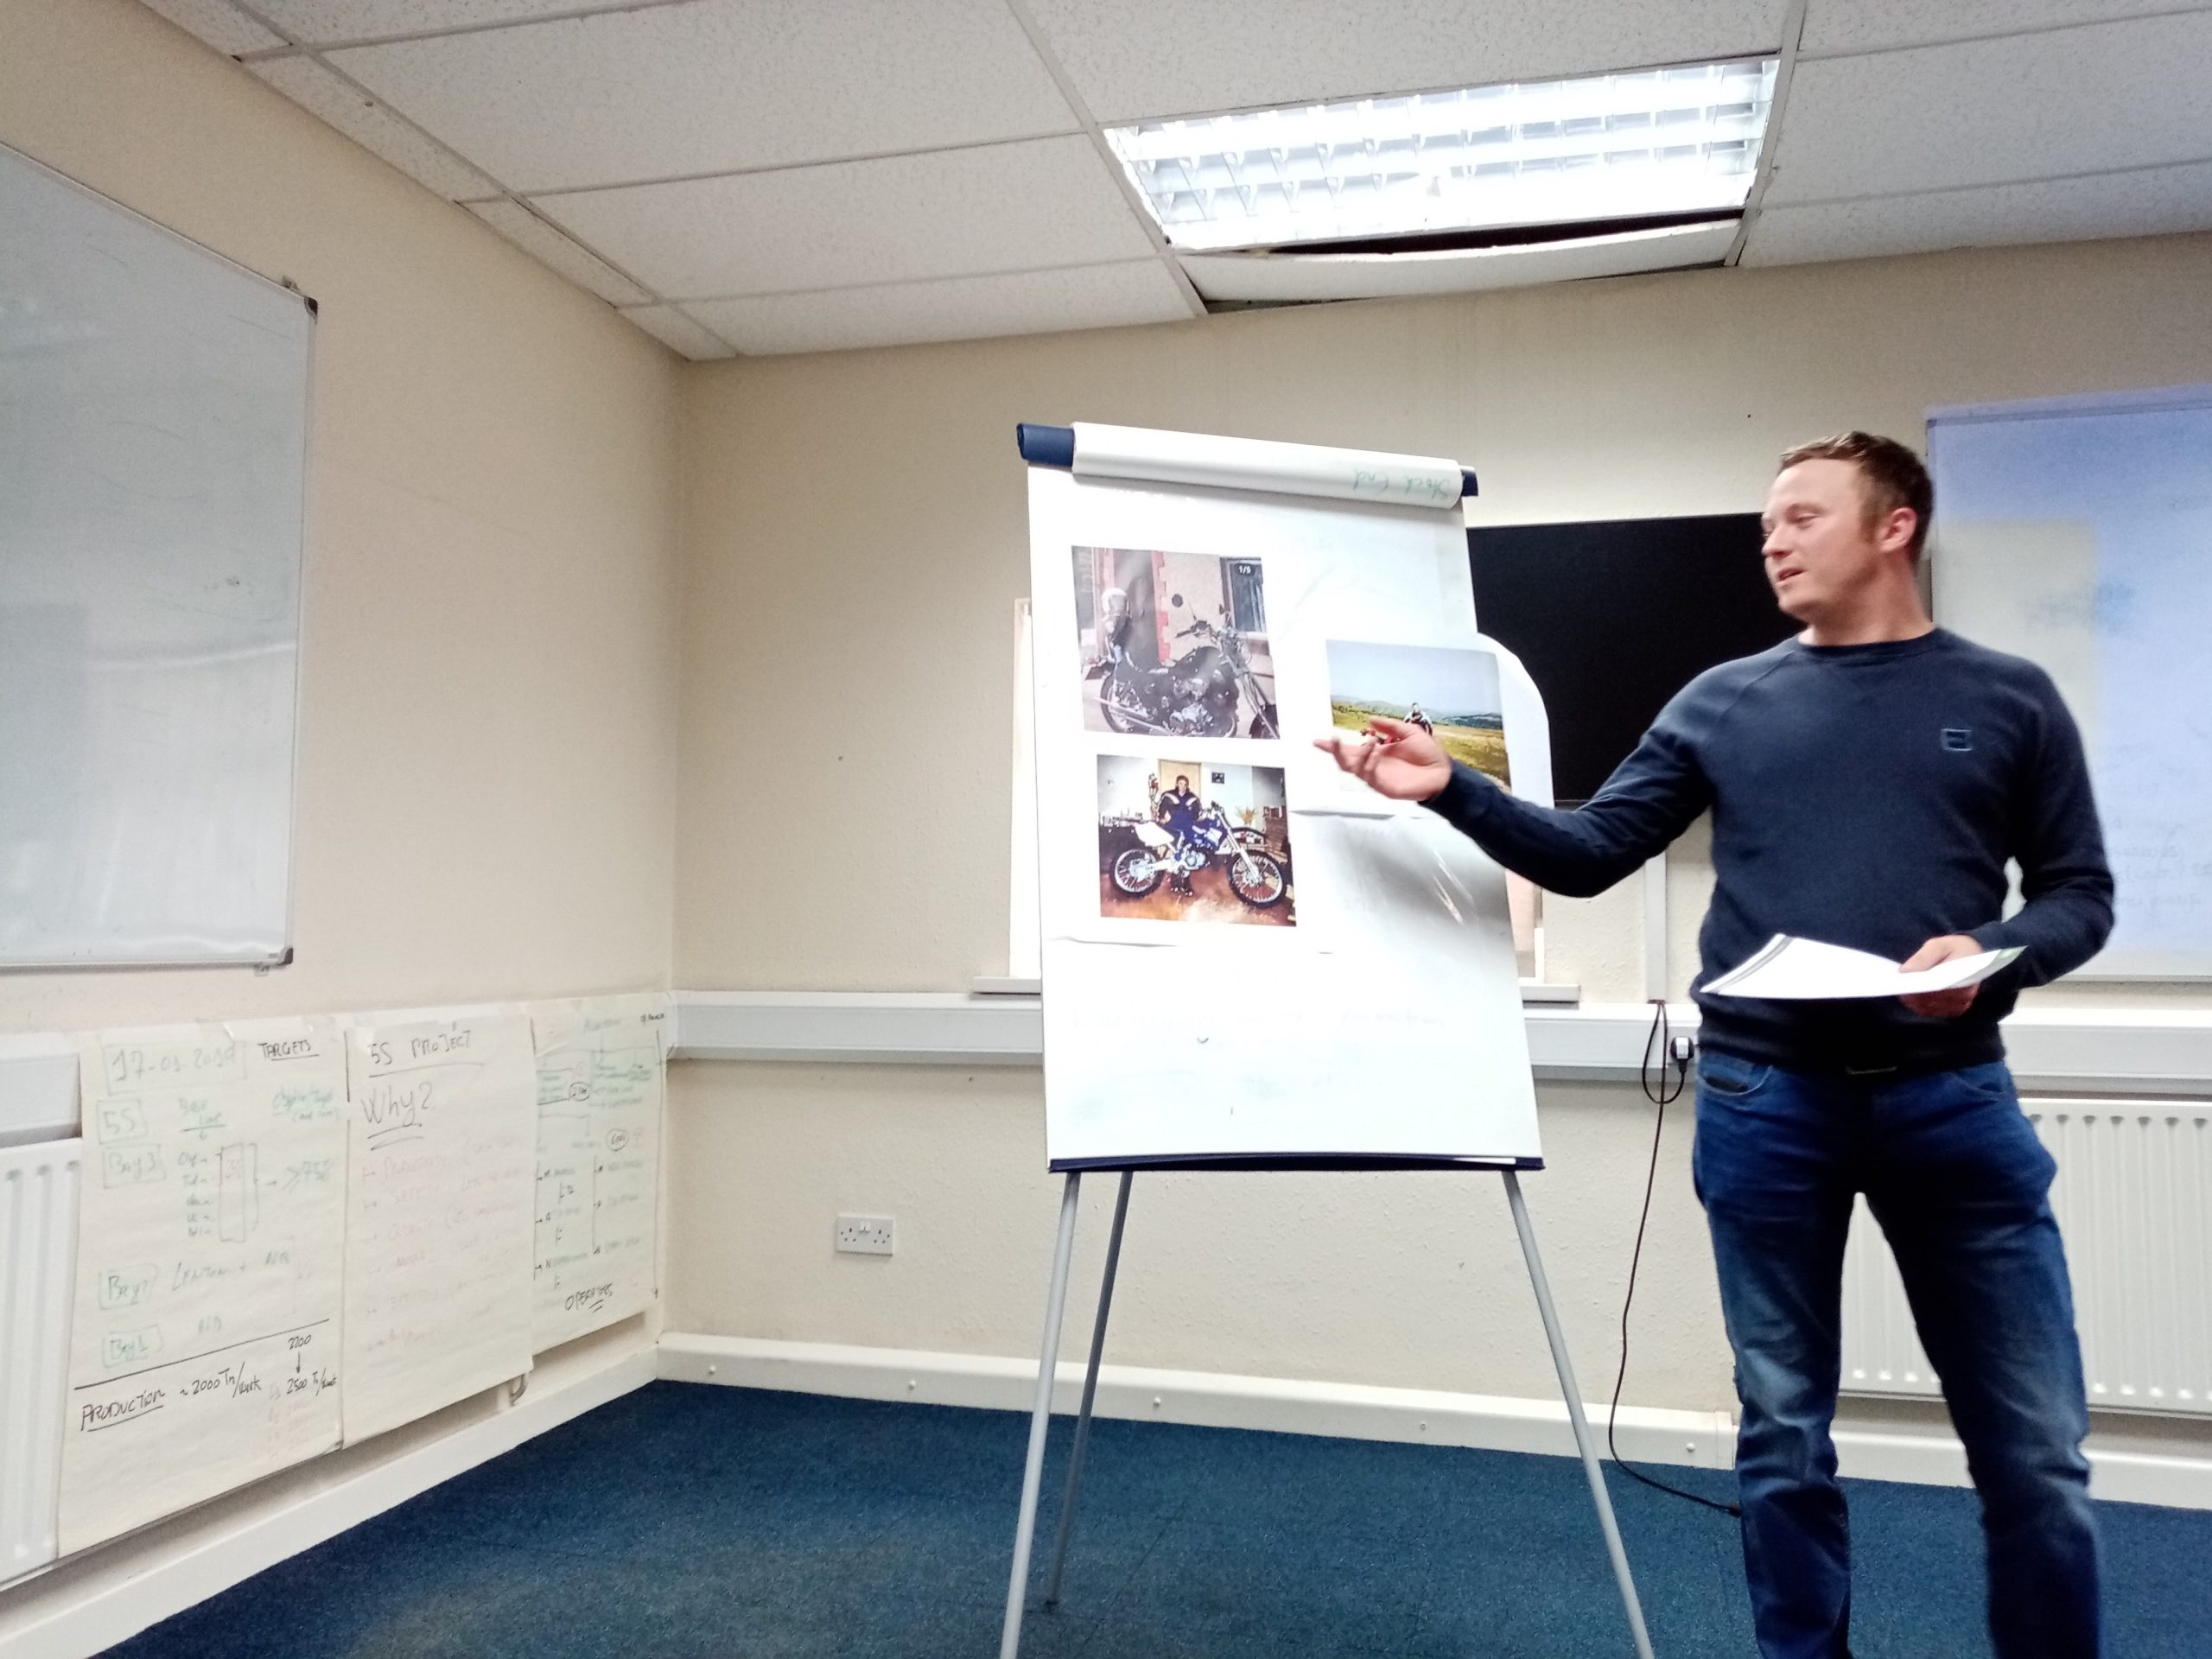 Image of learner doing a presentation on their chosen subject as part of Essential Skills qualification.